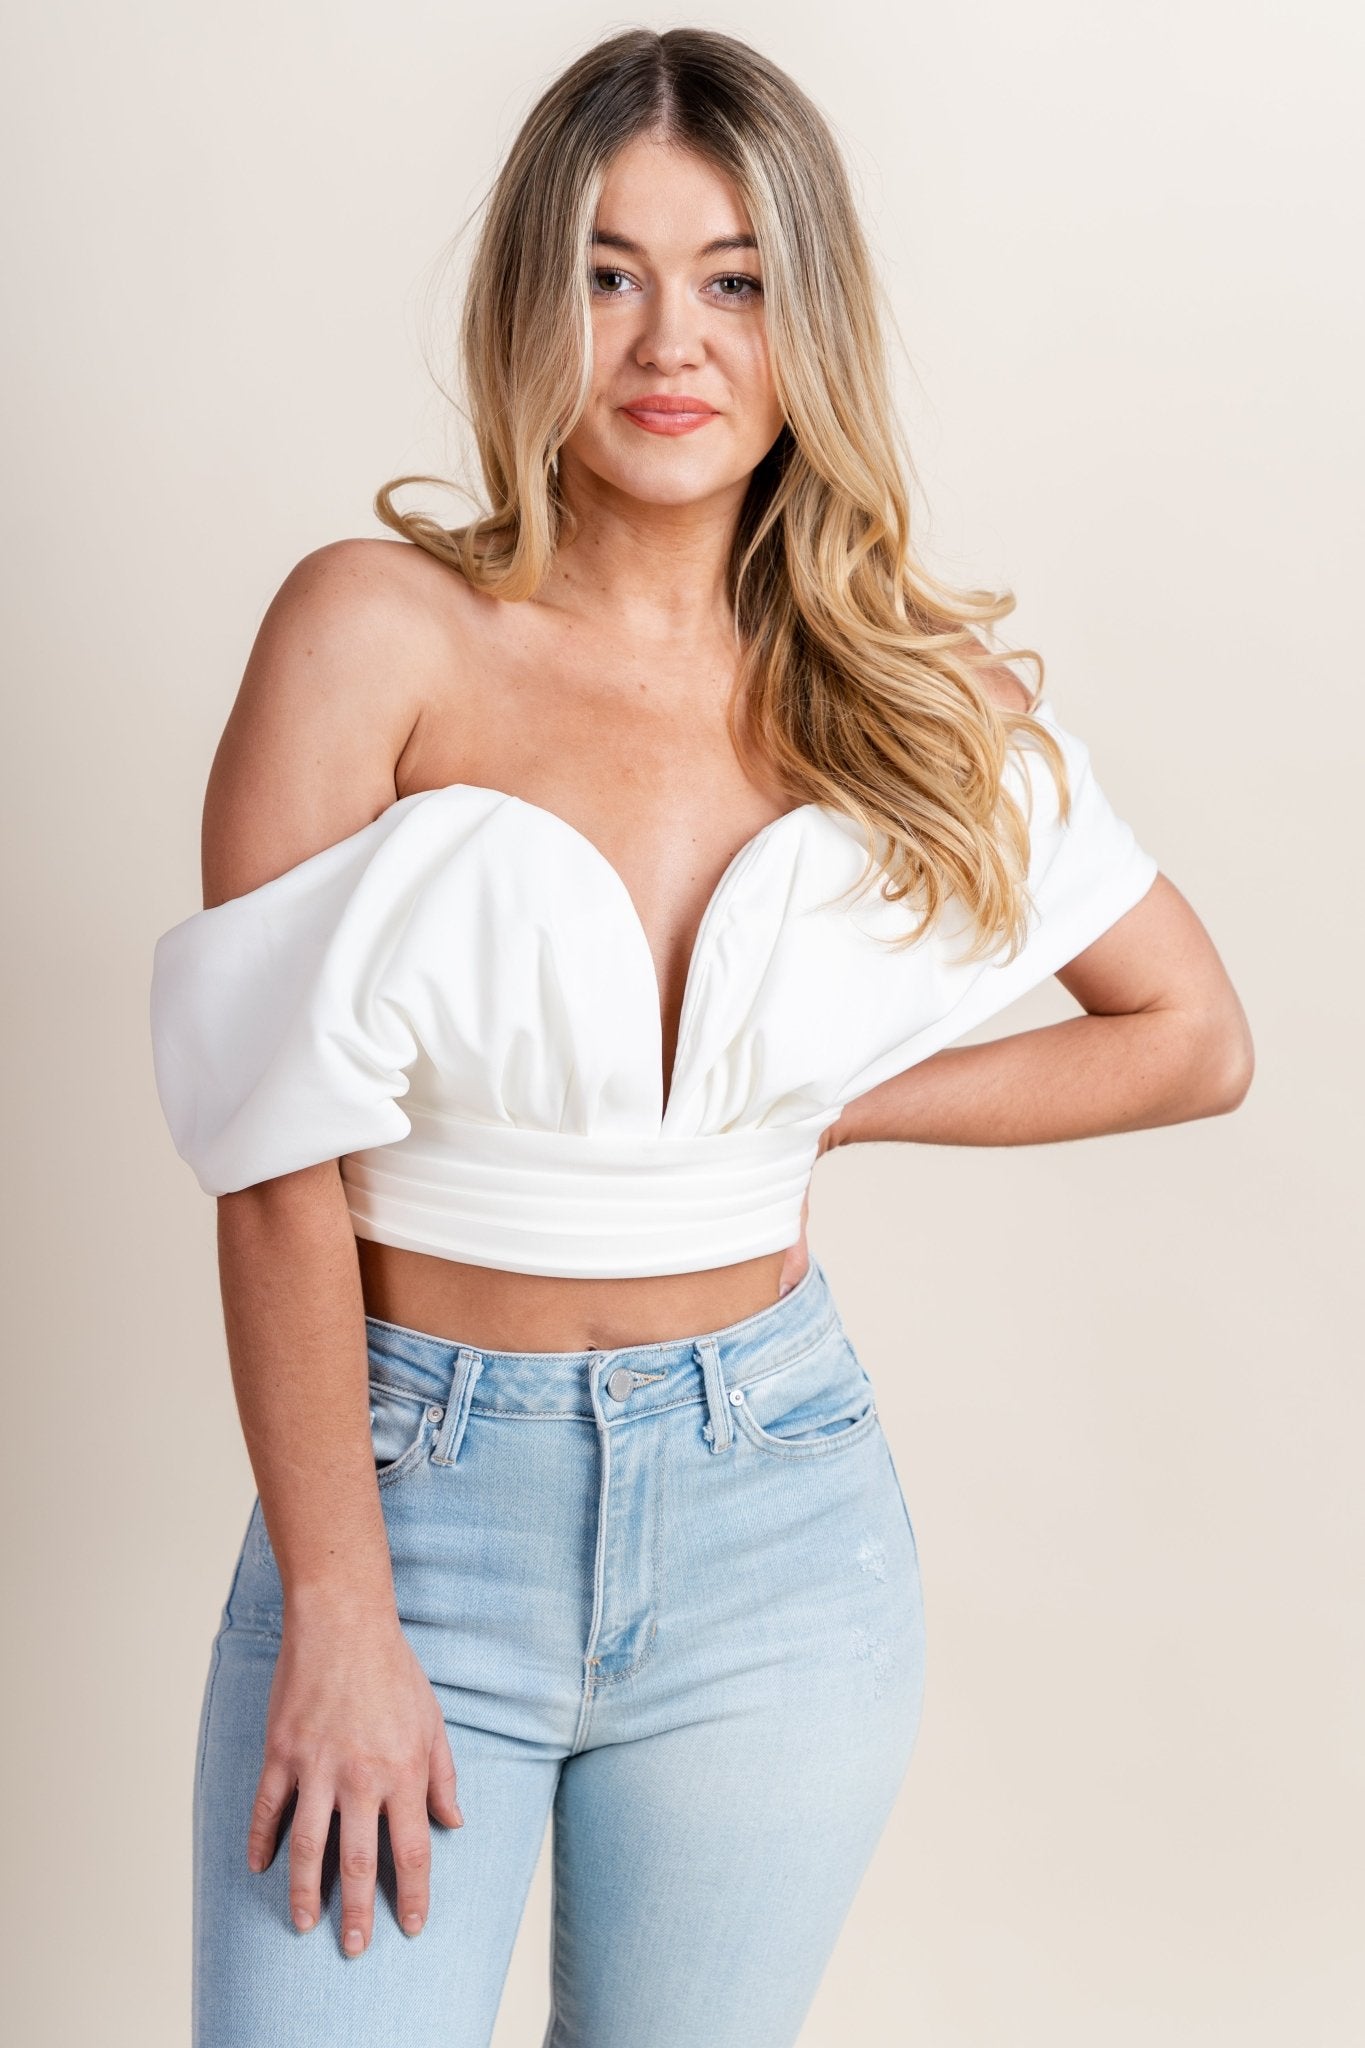 Off shoulder top cream - Fun Top - Stylish Bridal Graphic Tees at Lush Fashion Lounge Boutique in OKC